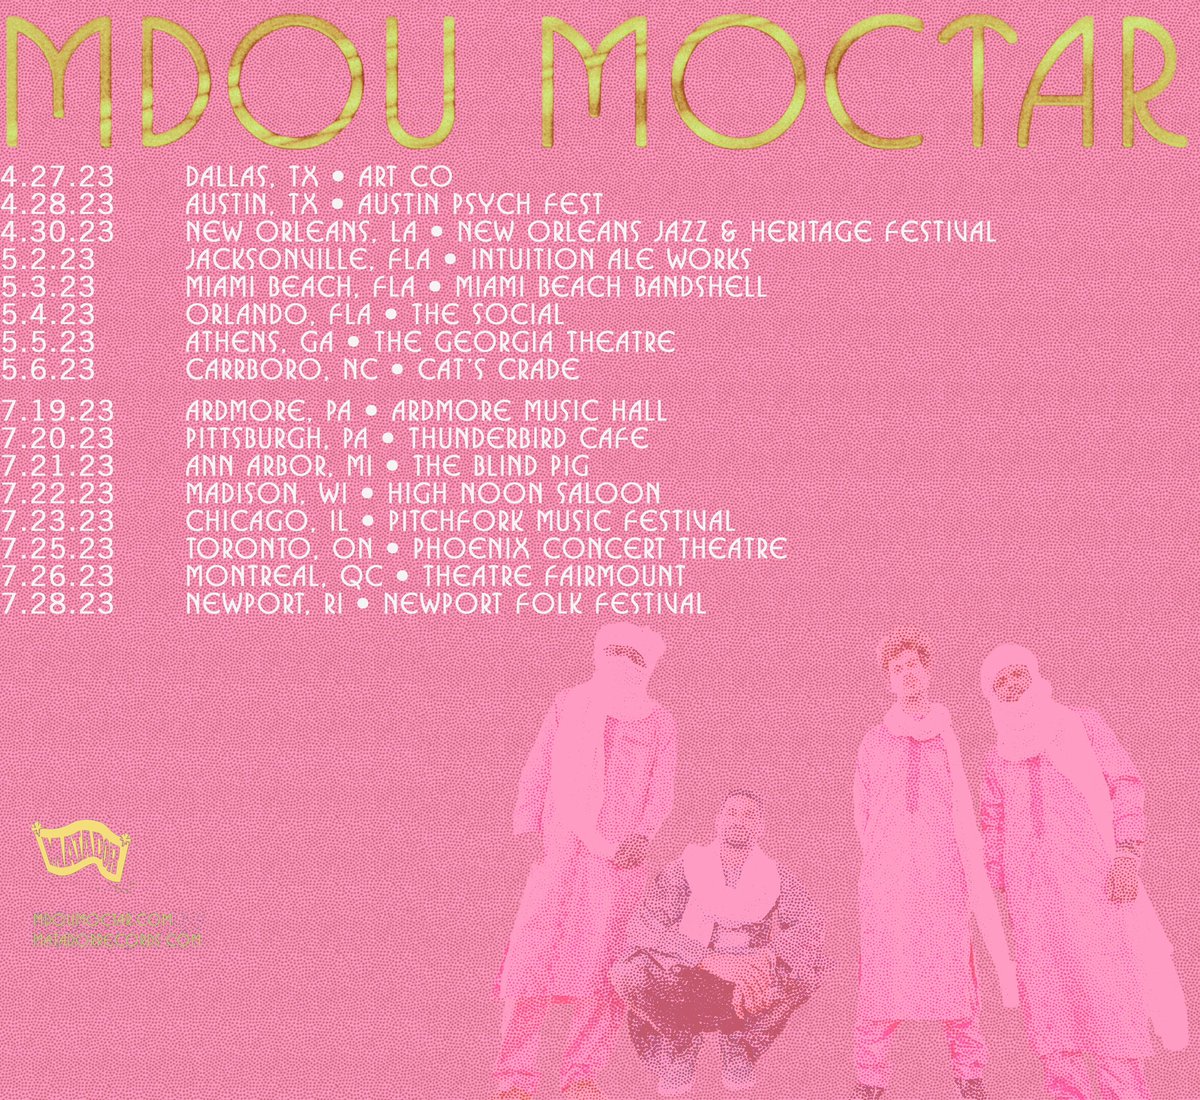 Our last shows of 2023 go on sale Thurs at 10am with ticket code “ILANA”! General on sale Friday. Go here for tickets to all dates - mdoumoctar.com/tour